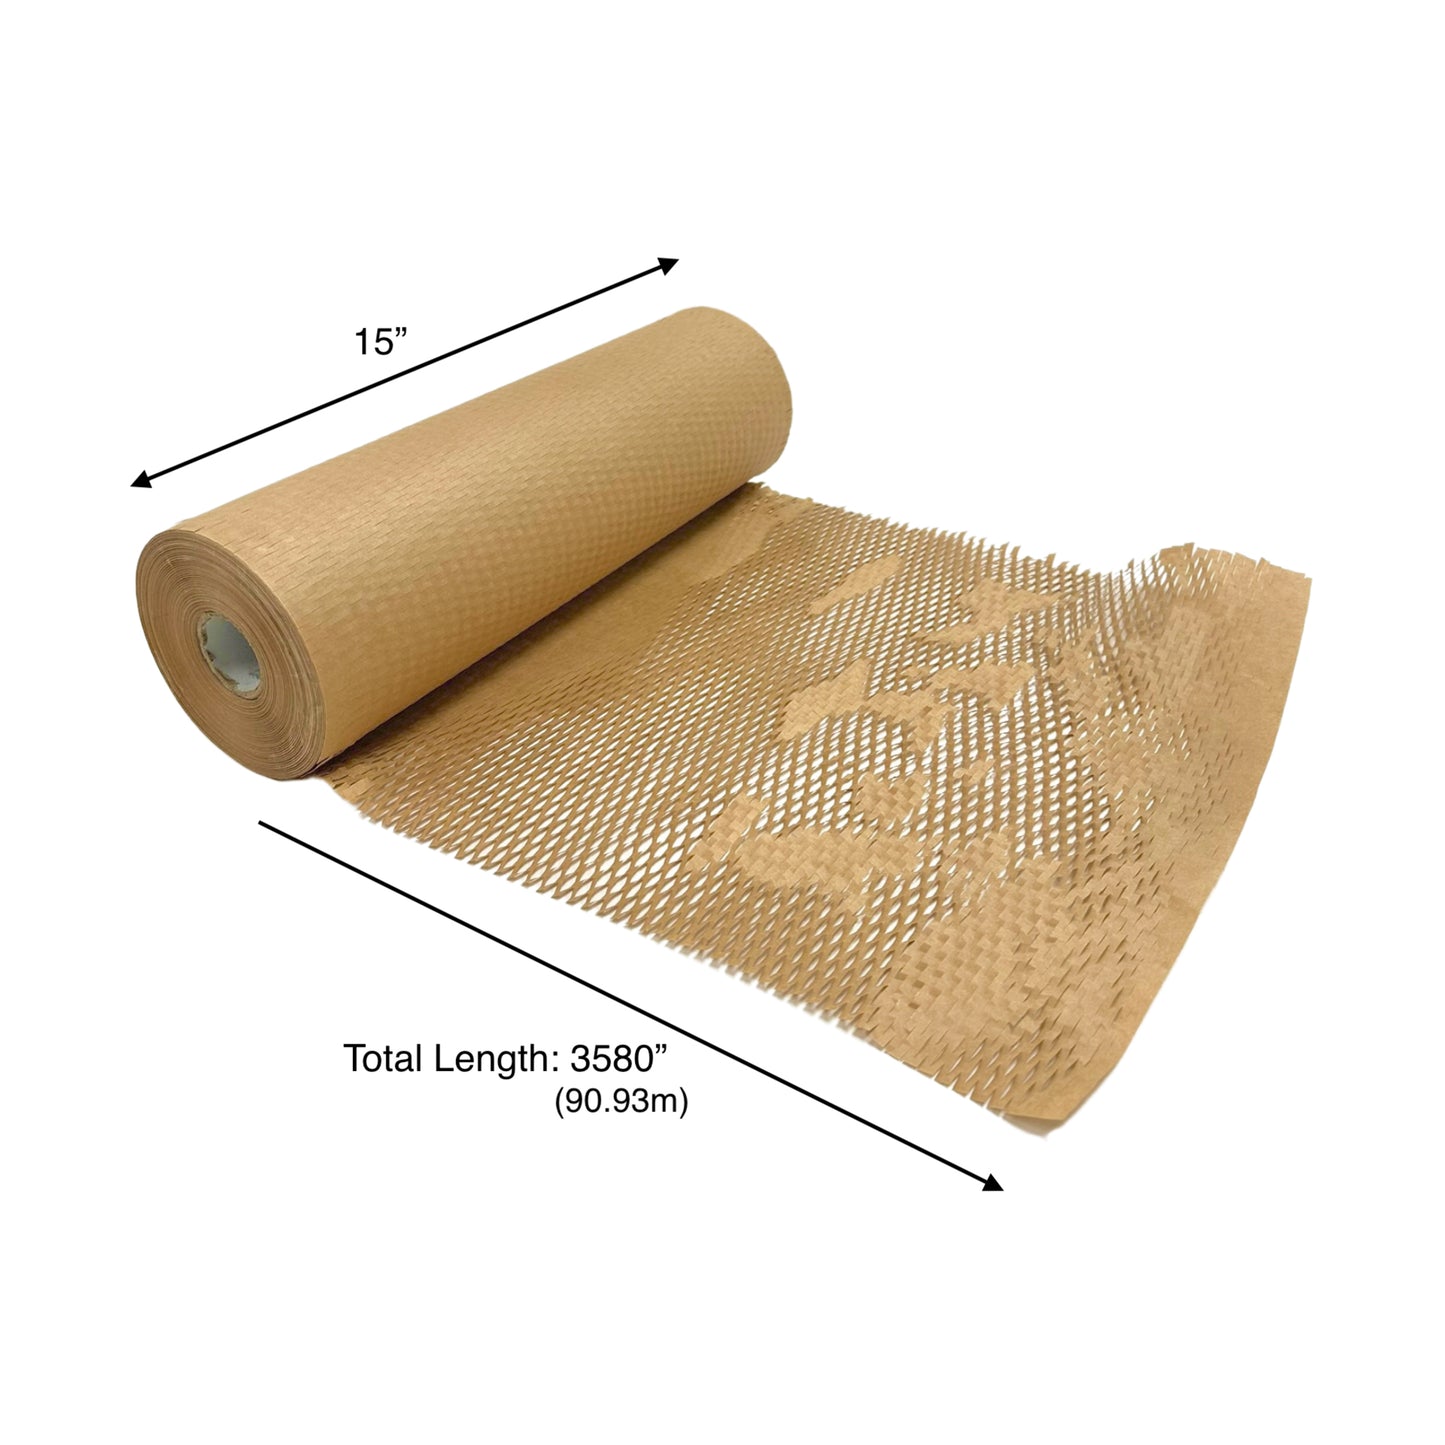 1pcs, Honeycomb, 15x3580 inches, Wrapping Paper Roll